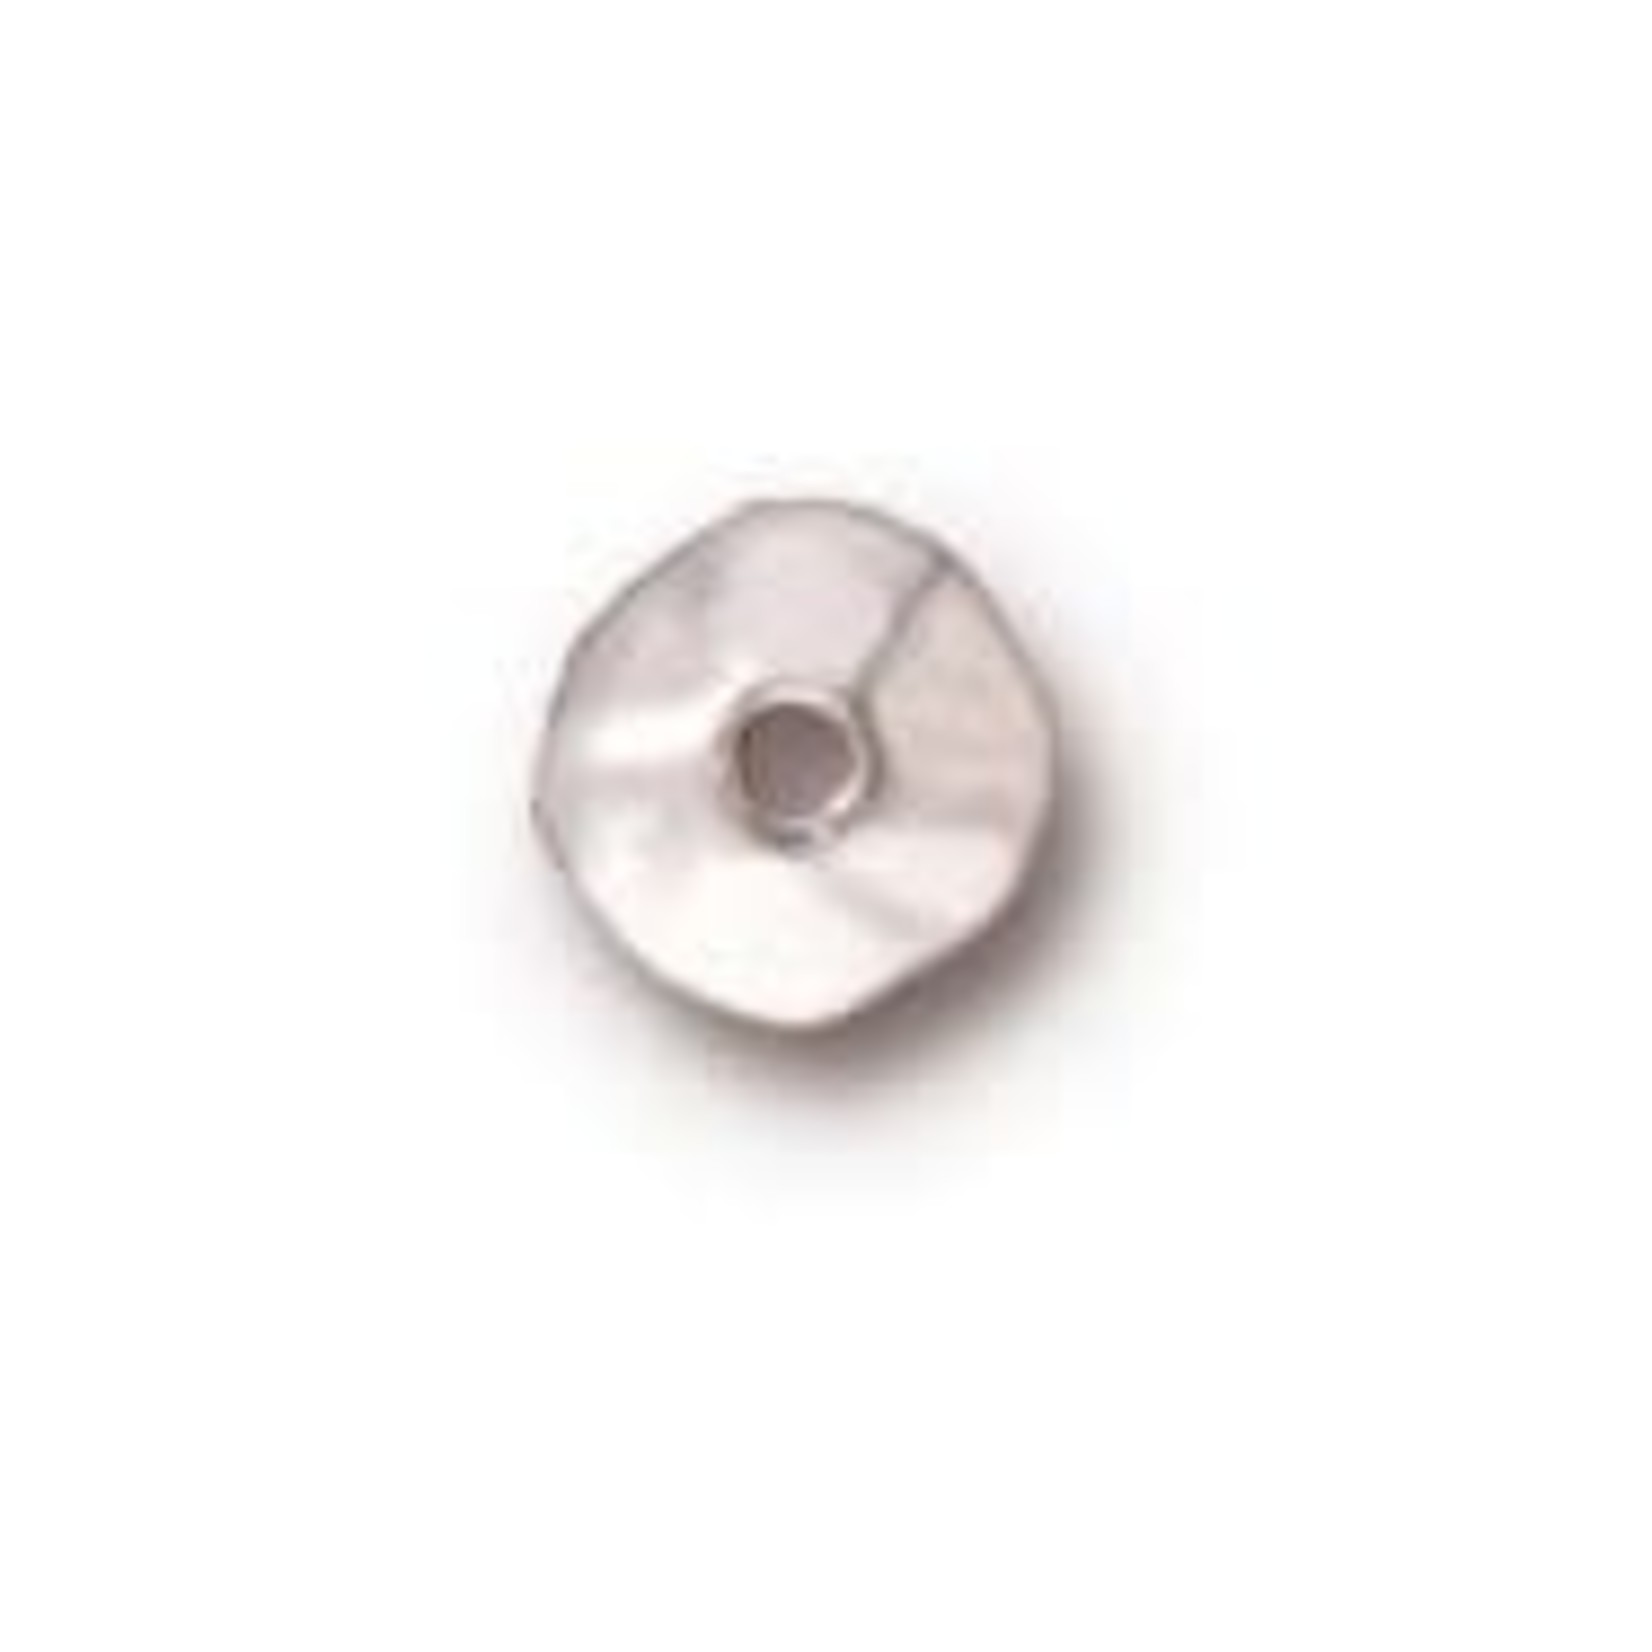 Tierracast Silver Plated 7mm Nugget Spacer Bead - 100 pieces